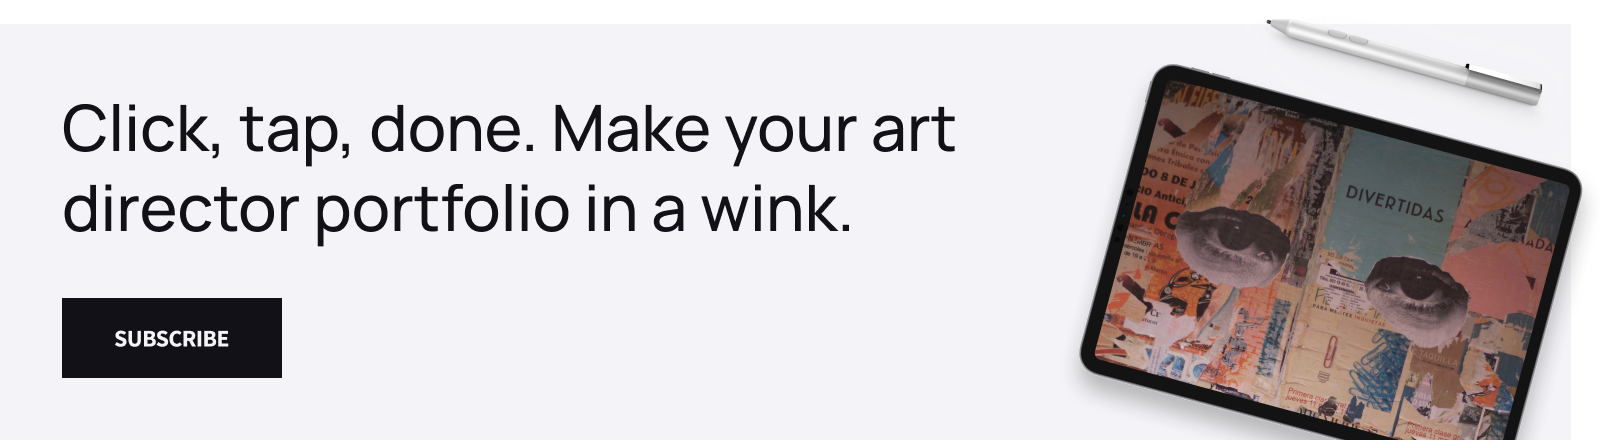 A banner saying "Click, tap, done. Make your art director portfolio in a wink." with a subscribe button.